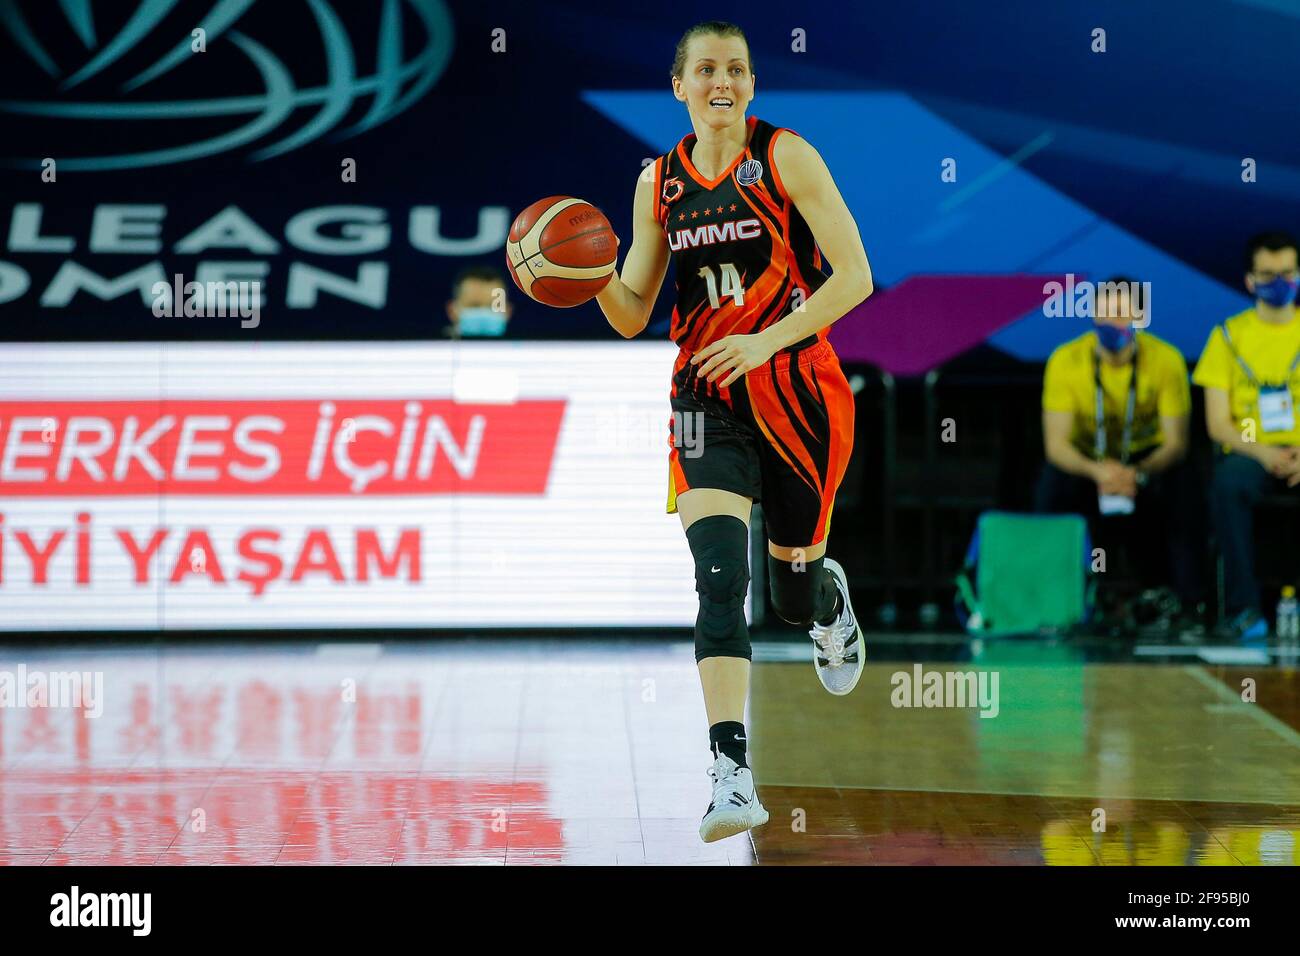 ISTANBUL, Turkey. 16th Apr, 2021: Basketbal: Fenerbahce Oznur Kablo v UMMC Ekaterinburg: Istanboel ISTANBUL, Turkey. 16th Apr, 2021. APRIL 16: Allie Quigley of UMMC Ekaterinburg during the Euroleague Women Final Four match between Fenerbahce Oznur Kablo and UMMC Ekaterinburg at Volkswagen Arena on April 16, 2021 in Istanbul, Turkey (Photo by /Orange Pictures) Credit: Orange Pics BV/Alamy Live News Stock Photo